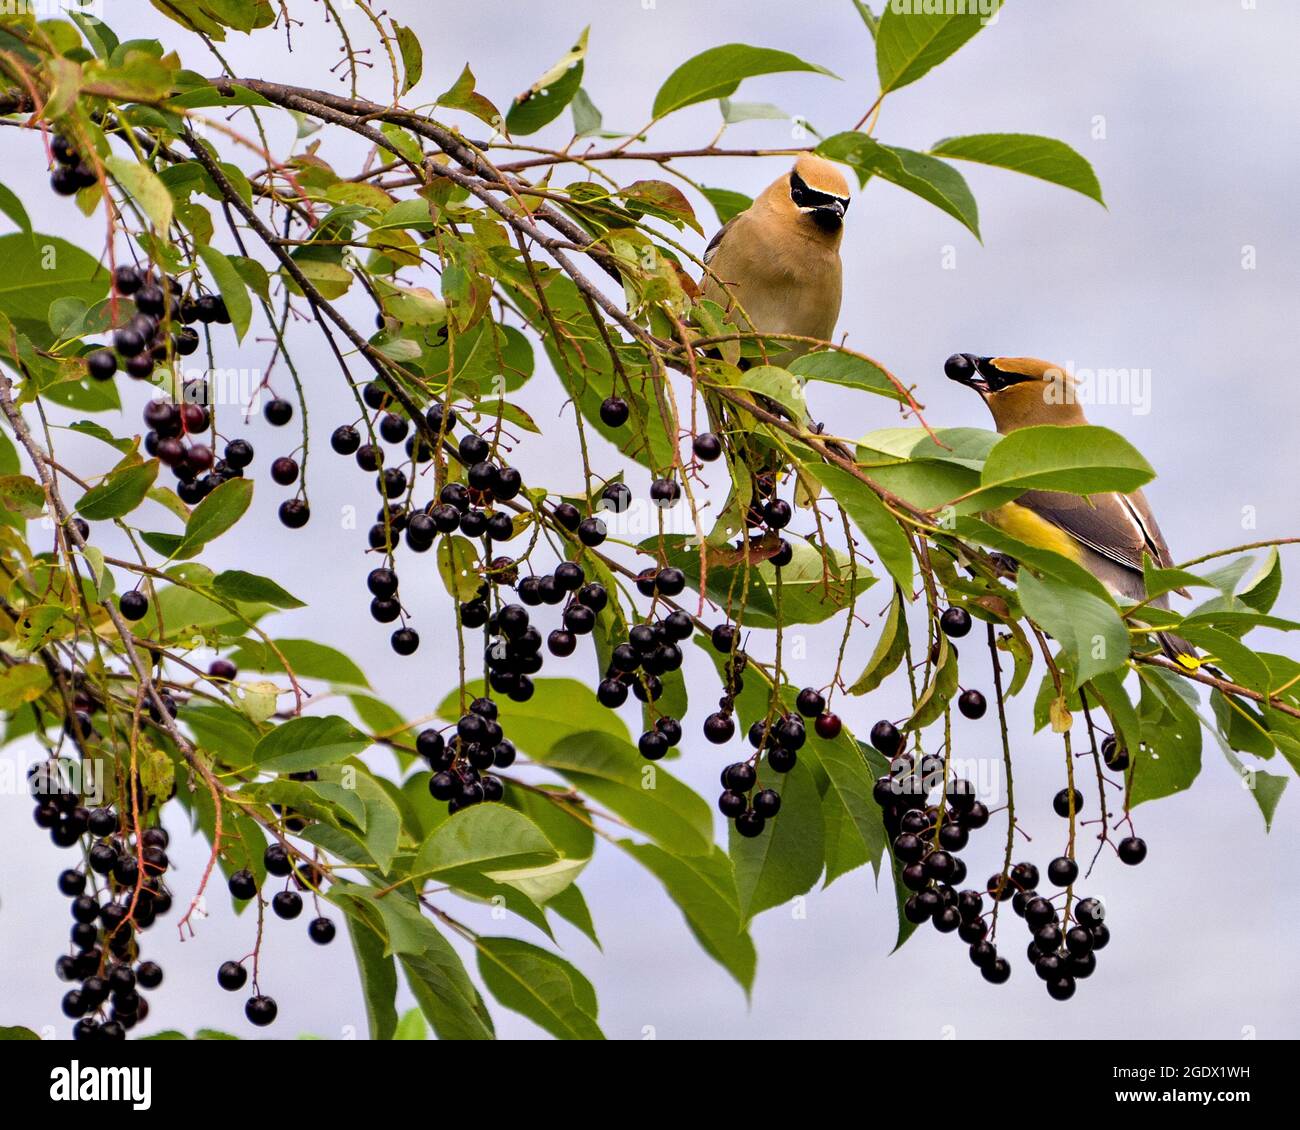 Cedar Waxwing birds perched eating wild berry fruits in their environment and habitat surrounding with a blur blue sky background. Stock Photo